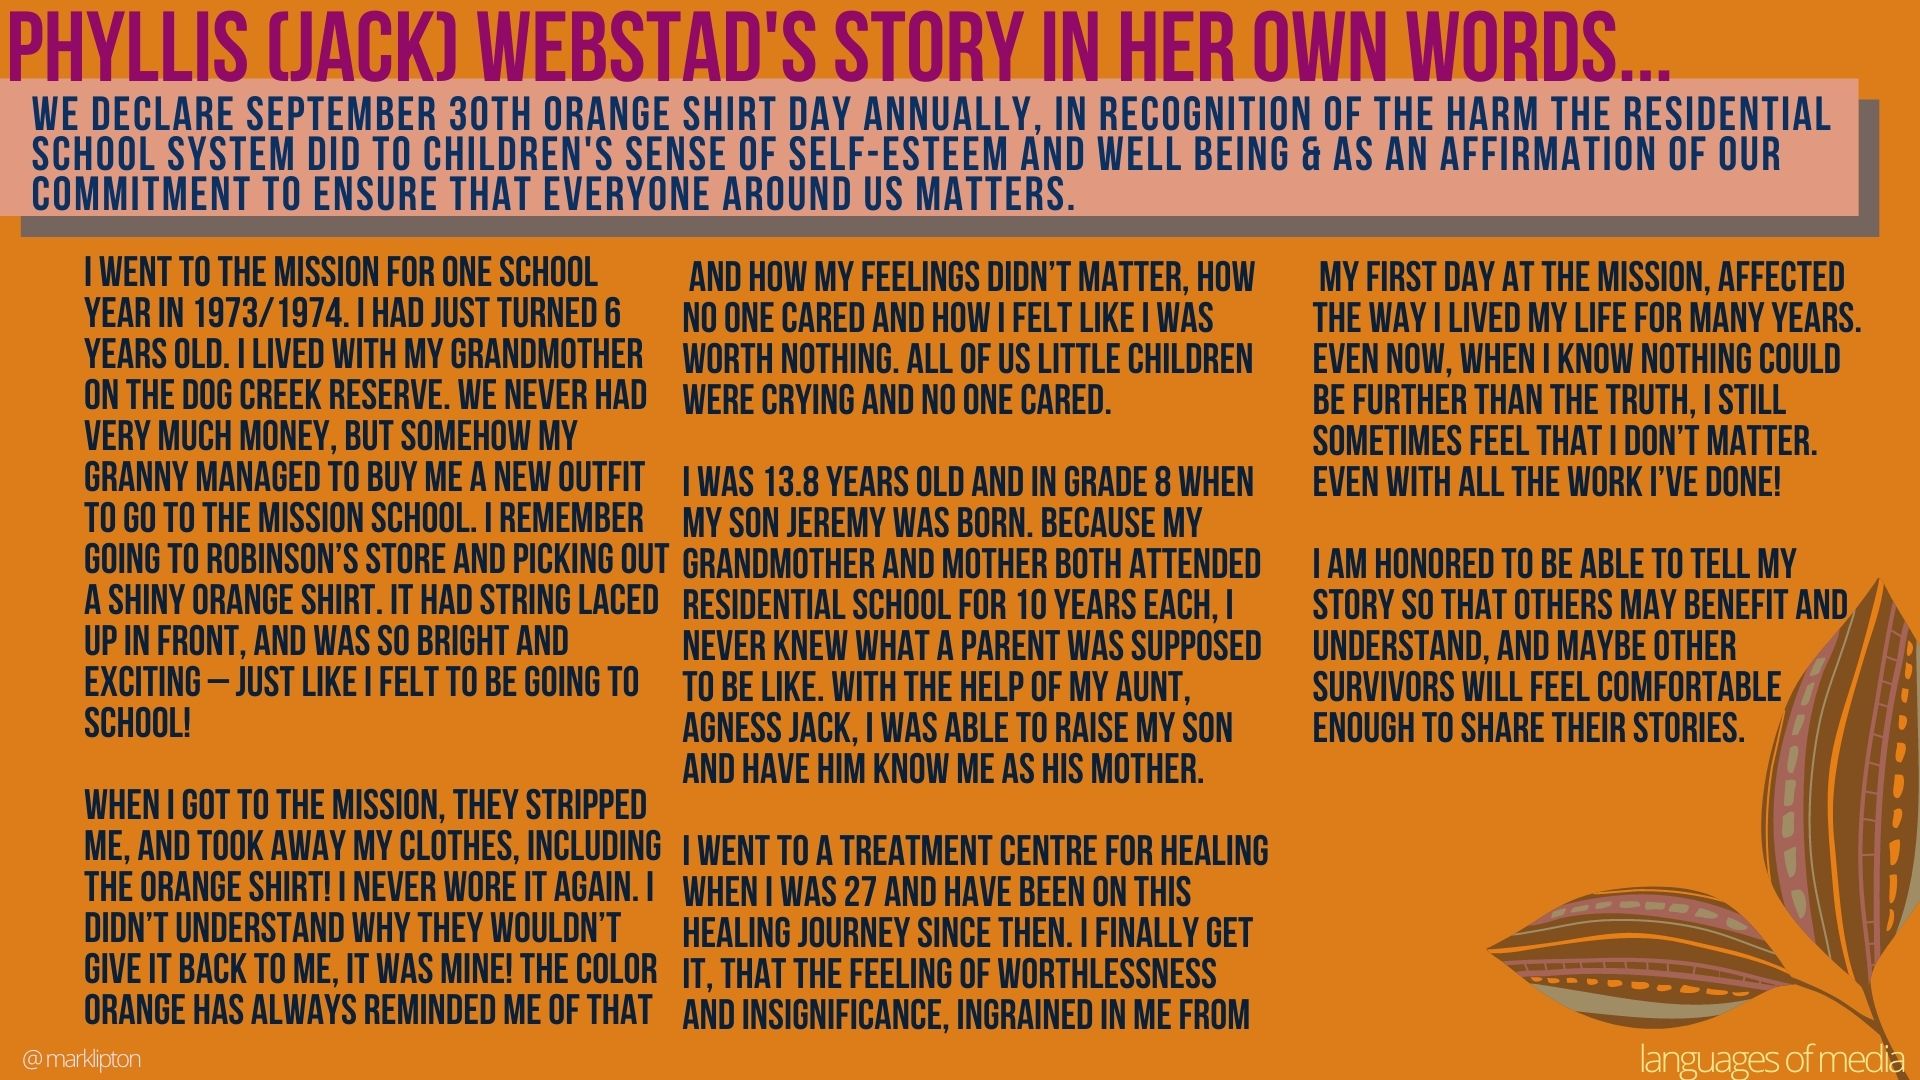 image: Phyllis (Jack) Webstad's story in her own words... We declare September 30th Orange Shirt Day annually; in recognition of the harm the residential school system did to children's sense of self-esteem and well-being & as an affirmation of our commitment to ensure that everyone around us matters. I went to the Mission for one school year in 1973/1974. I had just turned 6 years old. I lived with my grandmother on the Dog Creek reserve. We never had very much money, but somehow my granny managed to buy me a new outfit to go to the Mission school. I remember going to Robinson’s store and picking out a shiny orange shirt. It had string laced up in front and was so bright and exciting – just like I felt to be going to school! When I got to the Mission, they stripped me, and took away my clothes, including the orange shirt! I never wore it again. I didn’t understand why they wouldn’t give it back to me, it was mine! The colour orange has always reminded me of that and how my feelings didn’t matter, how no one cared and how I felt like I was worth nothing. All of us little children were crying, and no one cared. I was 13.8 years old and in grade 8 when my son Jeremy was born. Because my grandmother and mother both attended residential school for 10 years each, I never knew what a parent was supposed to be like. With the help of my aunt, Agness Jack, I was able to raise my son and have him know me as his mother. I went to a treatment centre for healing when I was 27 and have been on this healing journey since then. I finally get it, that the feeling of worthlessness and insignificance, ingrained in me from my first day at the mission, affected the way I lived my life for many years. Even now, when I know nothing could be further than the truth, I still sometimes feel that I don’t matter. Even with all the work I’ve done! I am honored to be able to tell my story so that others may benefit and understand, and maybe other survivors will feel comfortable enough to share their stories.